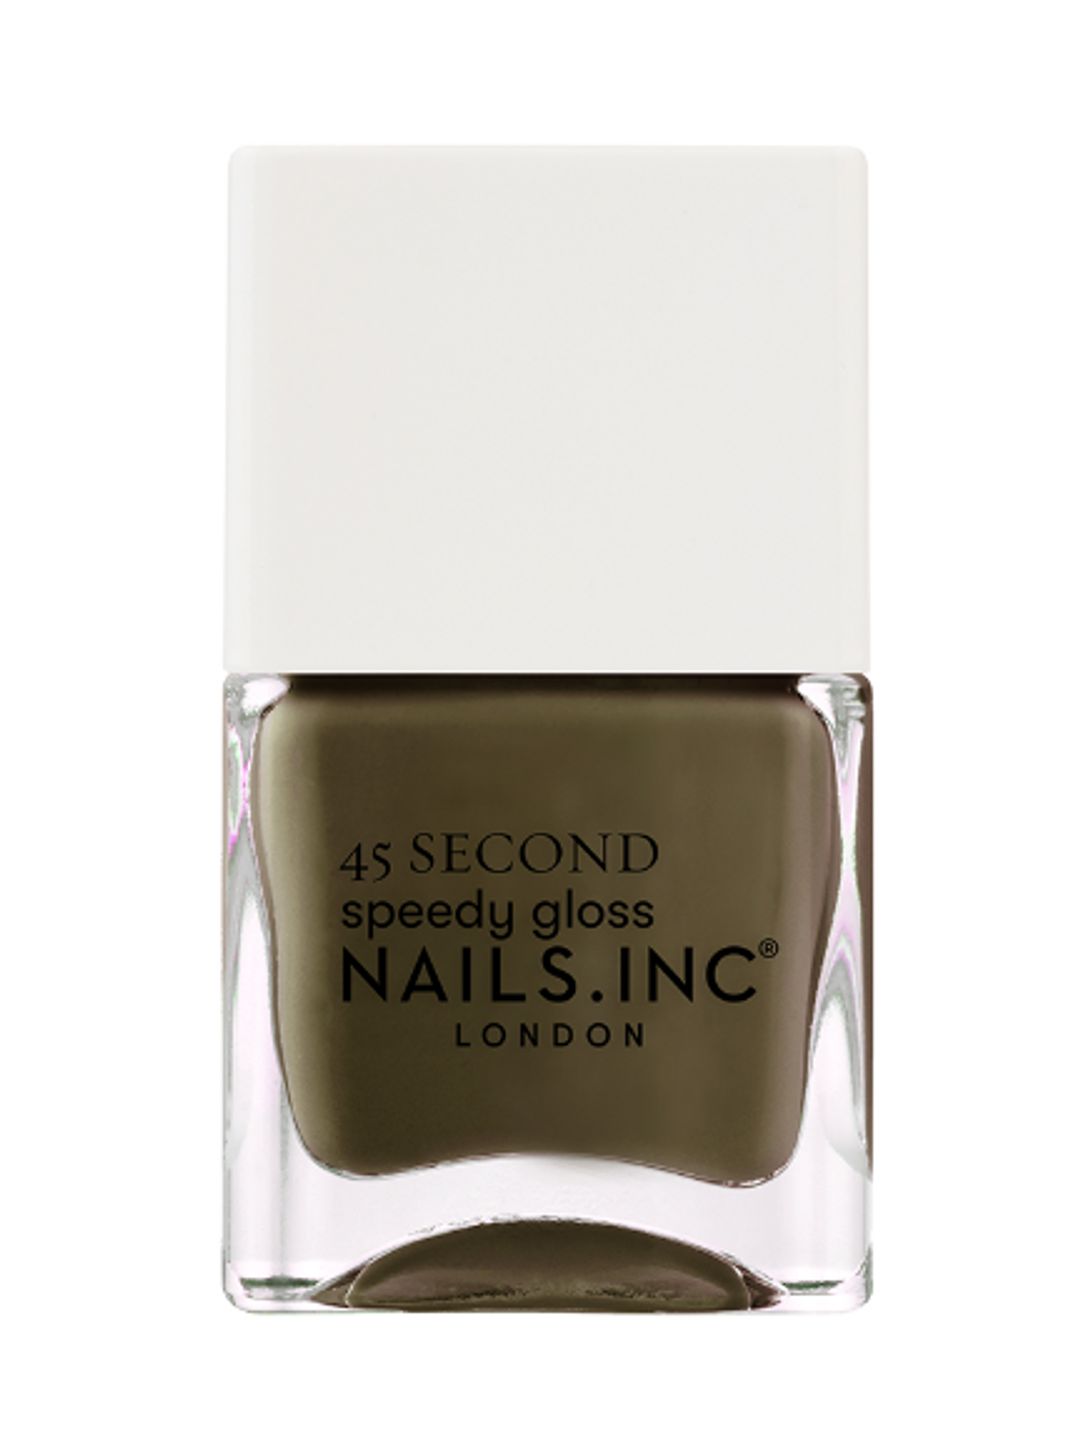 45 Second Speedy Gloss in 'Waiting In Westminster' - Nails.INC